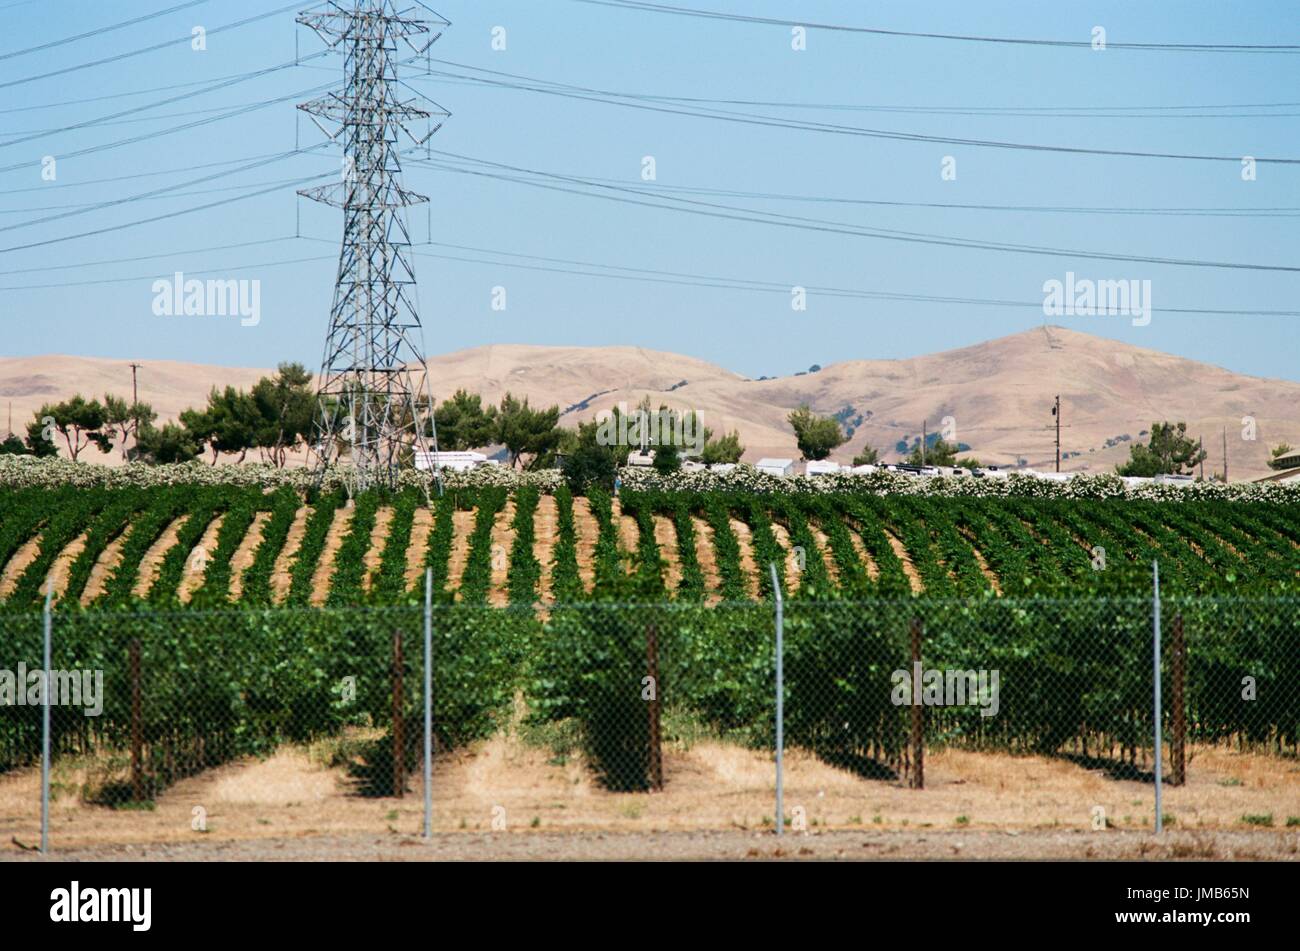 Rows of grape vines in a vineyard behind a fence, on rolling hills of dry straw, with high tension electrical line visible, in Livermore Wine Country, Livermore, California, June 25, 2017. Stock Photo